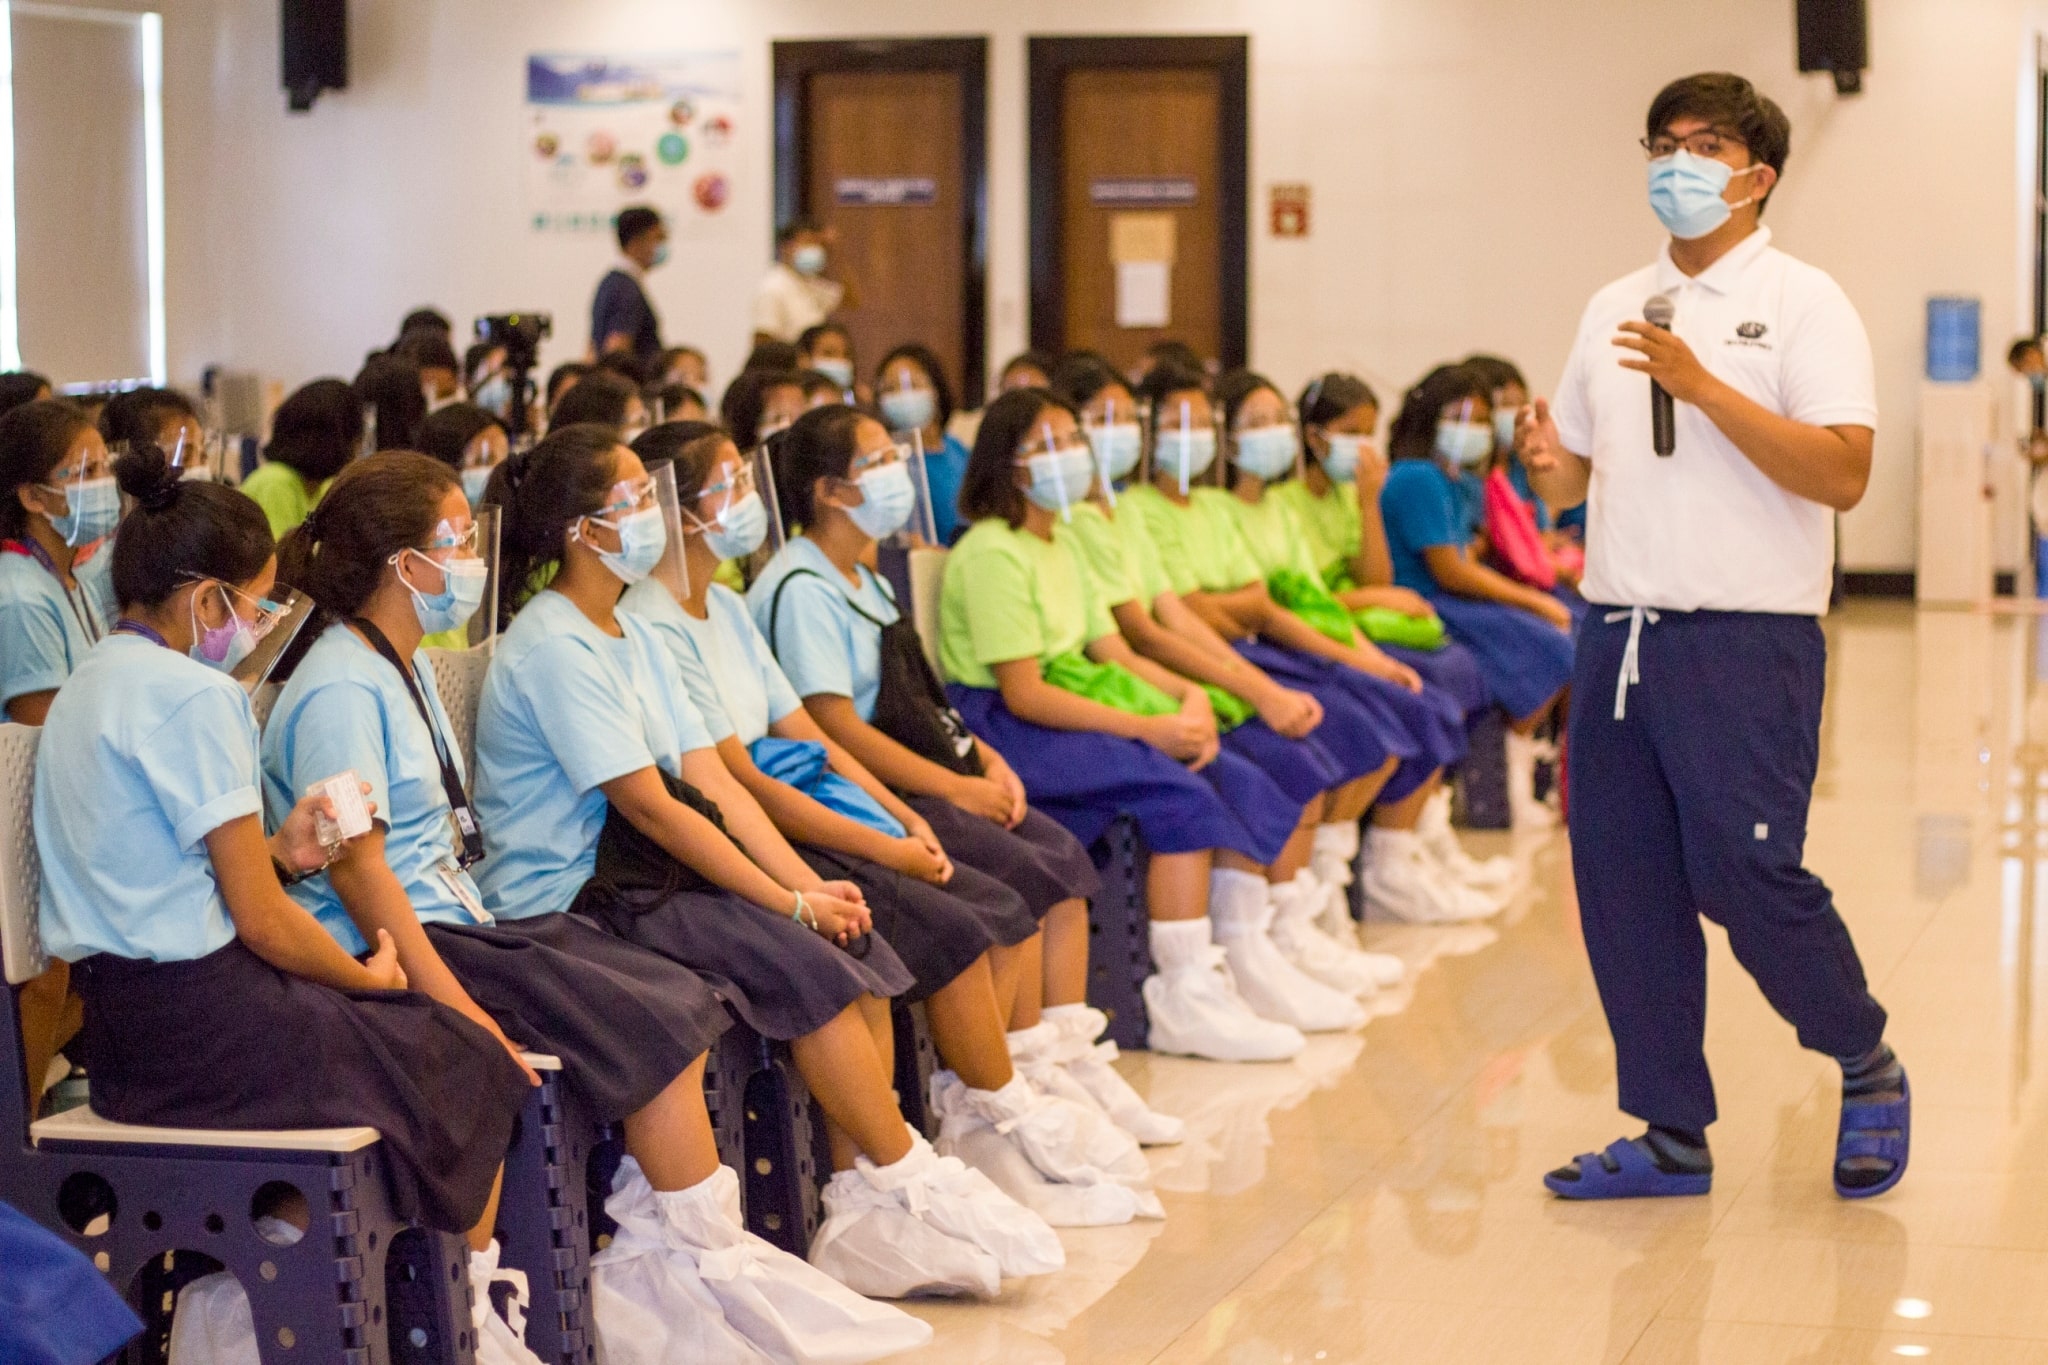 Apart from the free eye checkup, students also enjoy the opportunity to learn more about Tzu Chi from its staff and volunteers.【Photo by Matt Serrano】